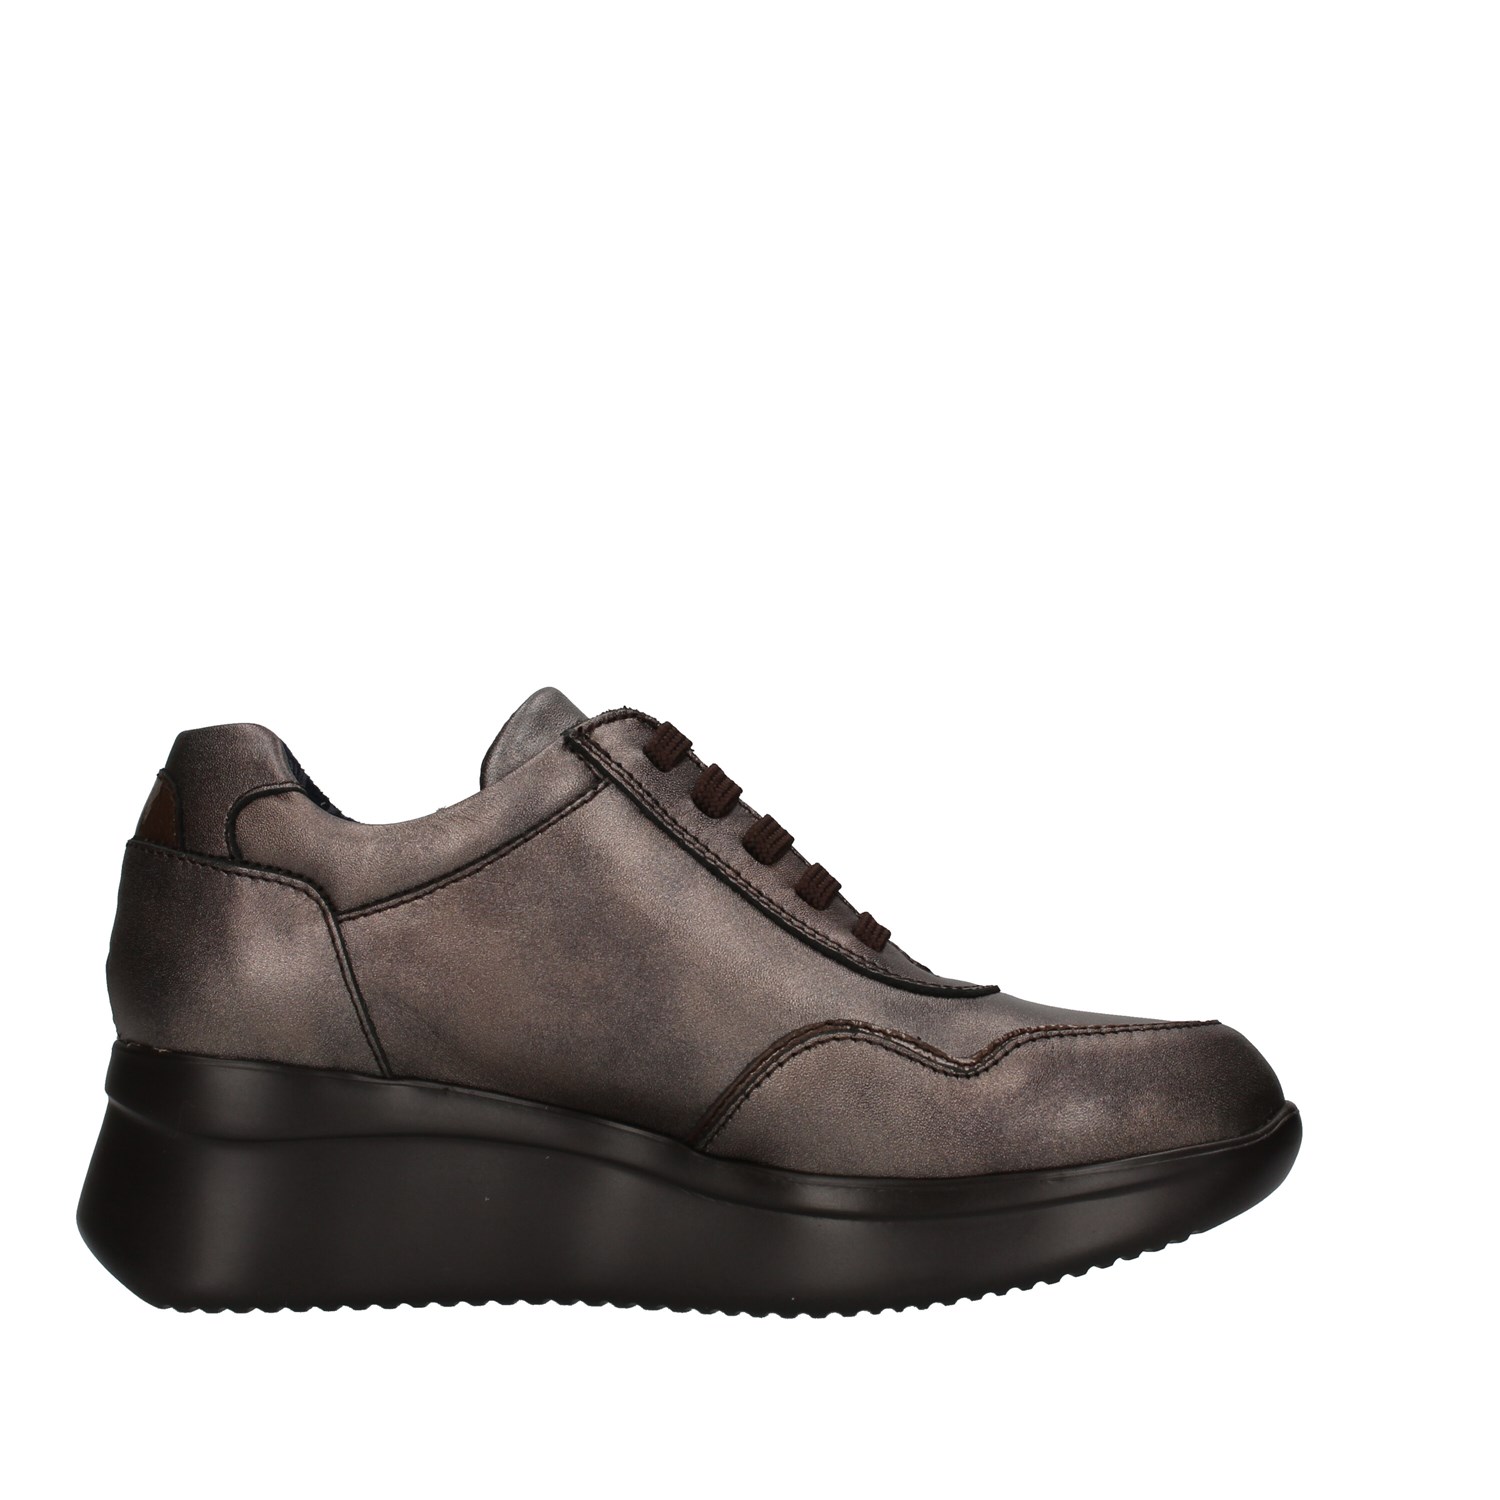 Callaghan 30008 BROWN Shoes Woman